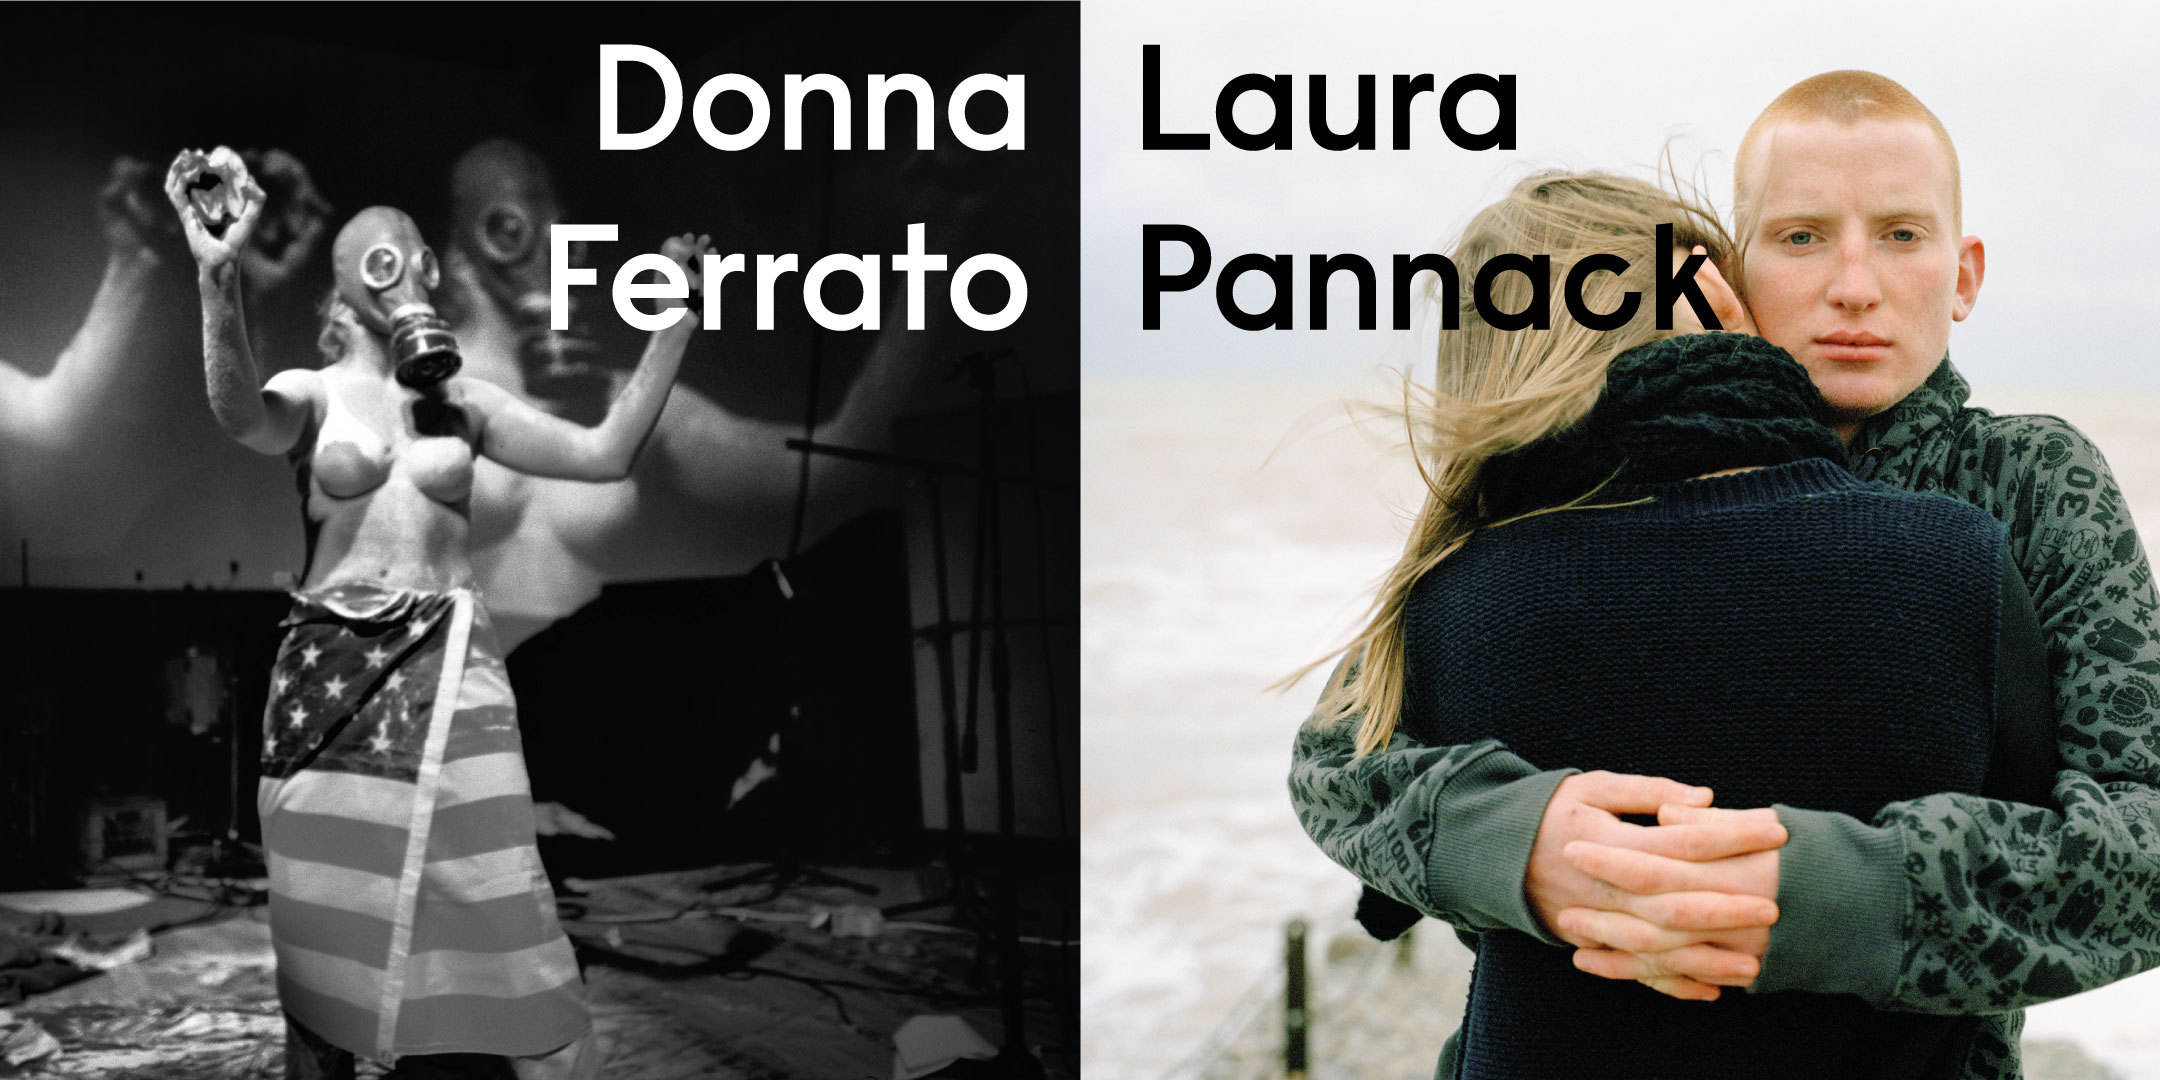 Photographs from Donna Ferrato and Laura Pannack.